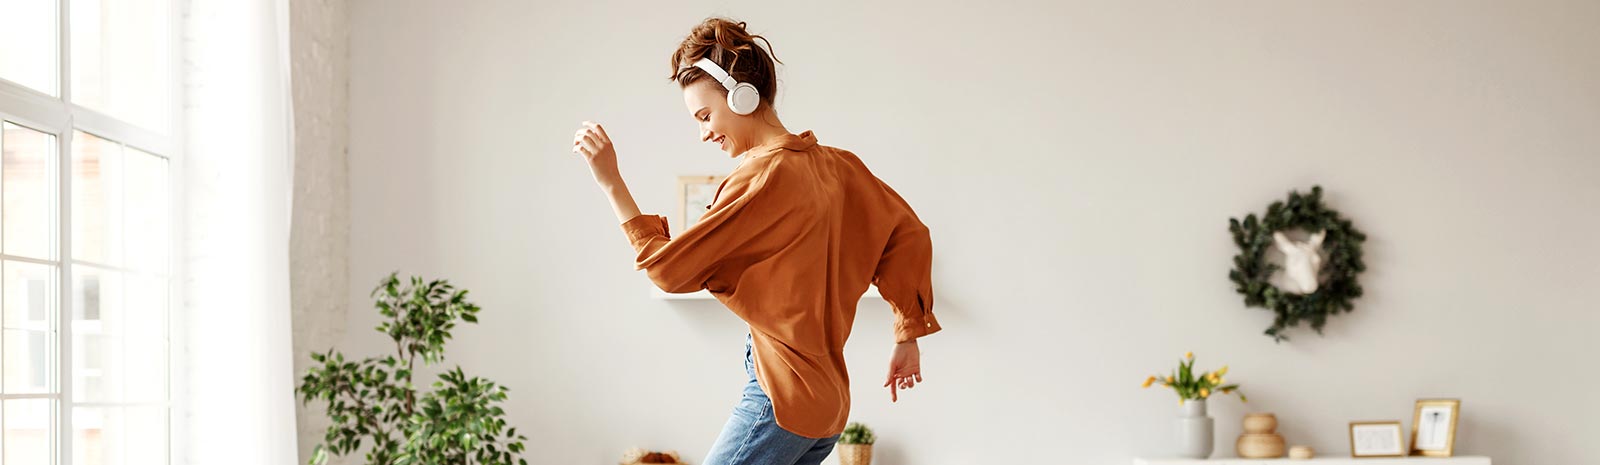 Woman dancing with headset on.